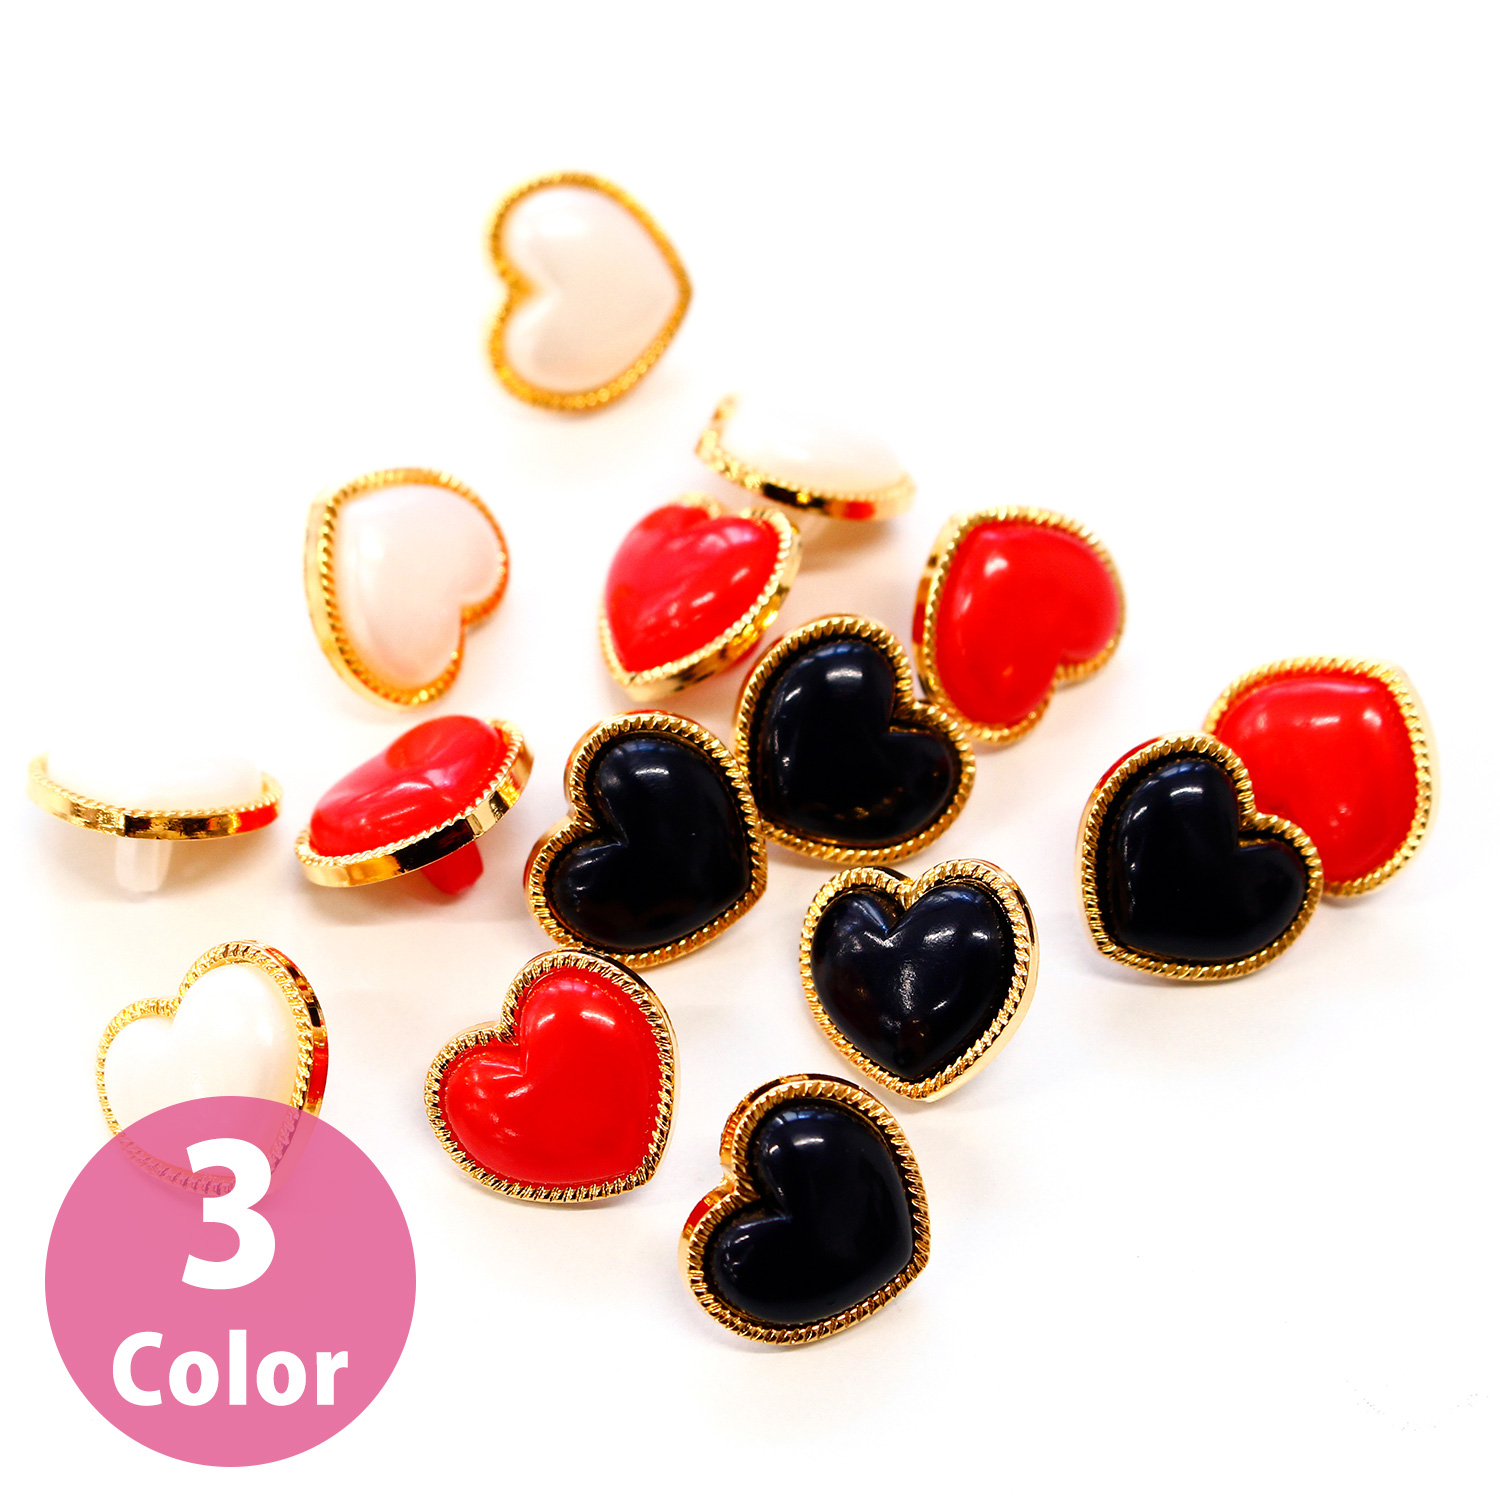 2511-11 Heart-shaped button 11.5mm 5 pieces (bag)